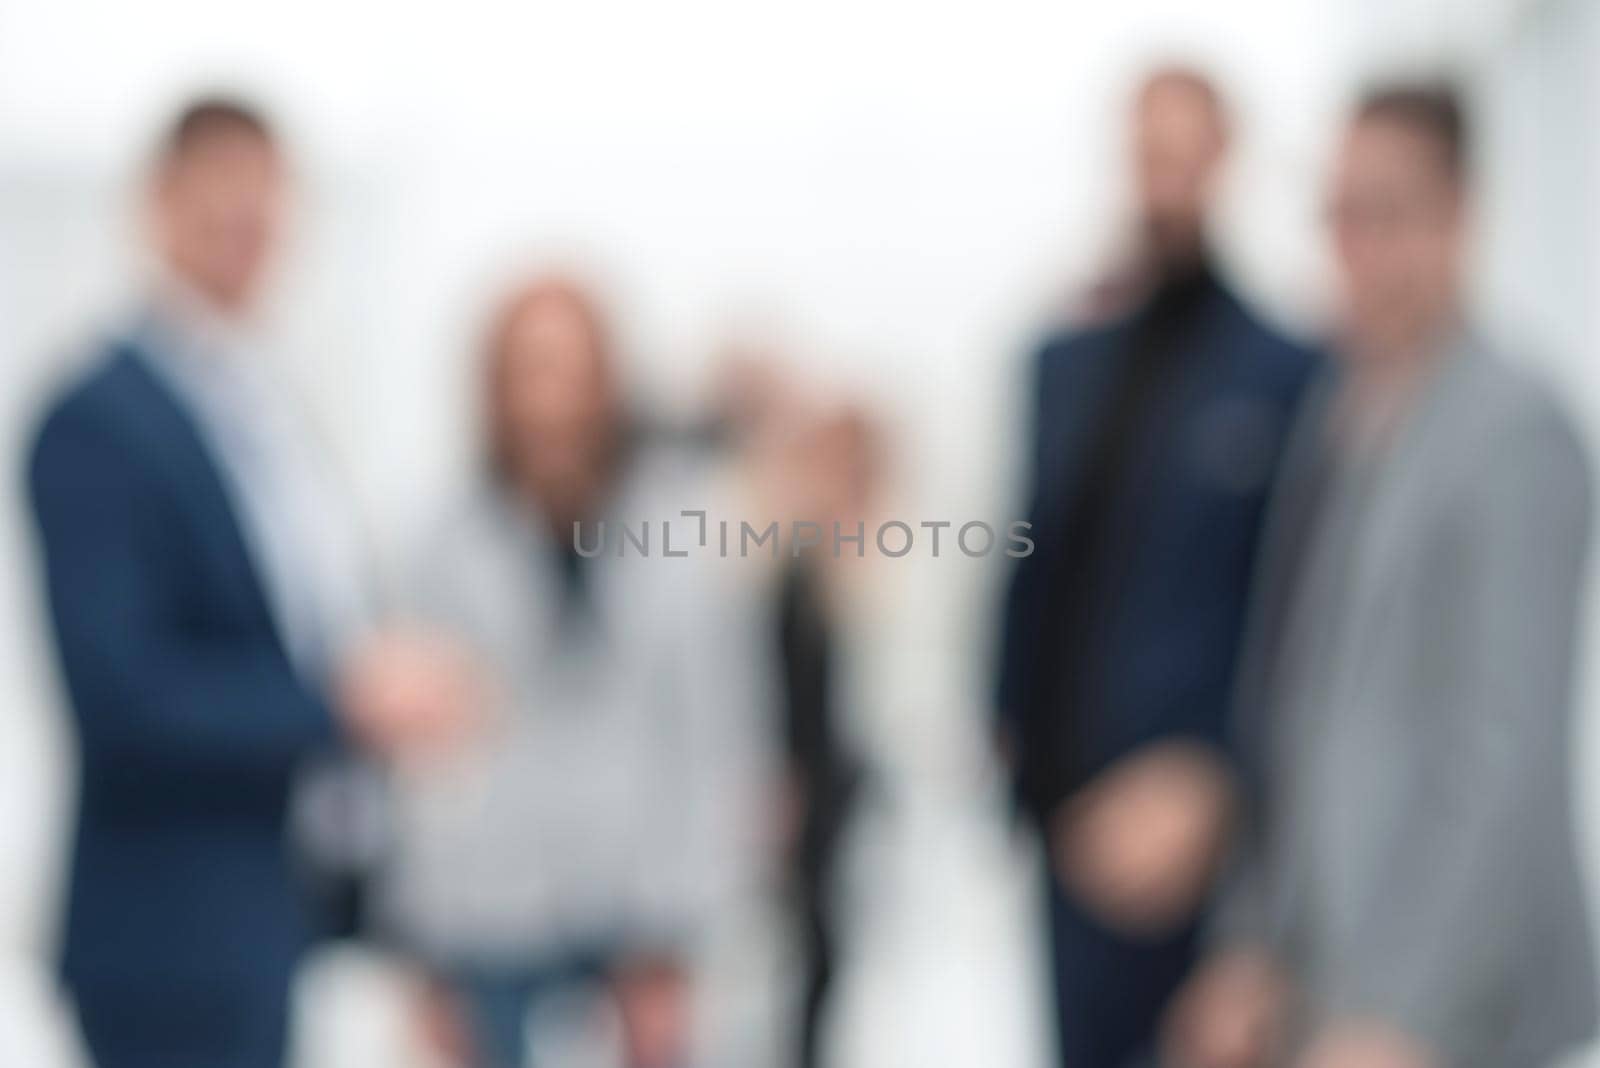 background image of group of business people in the office . photo with copy space